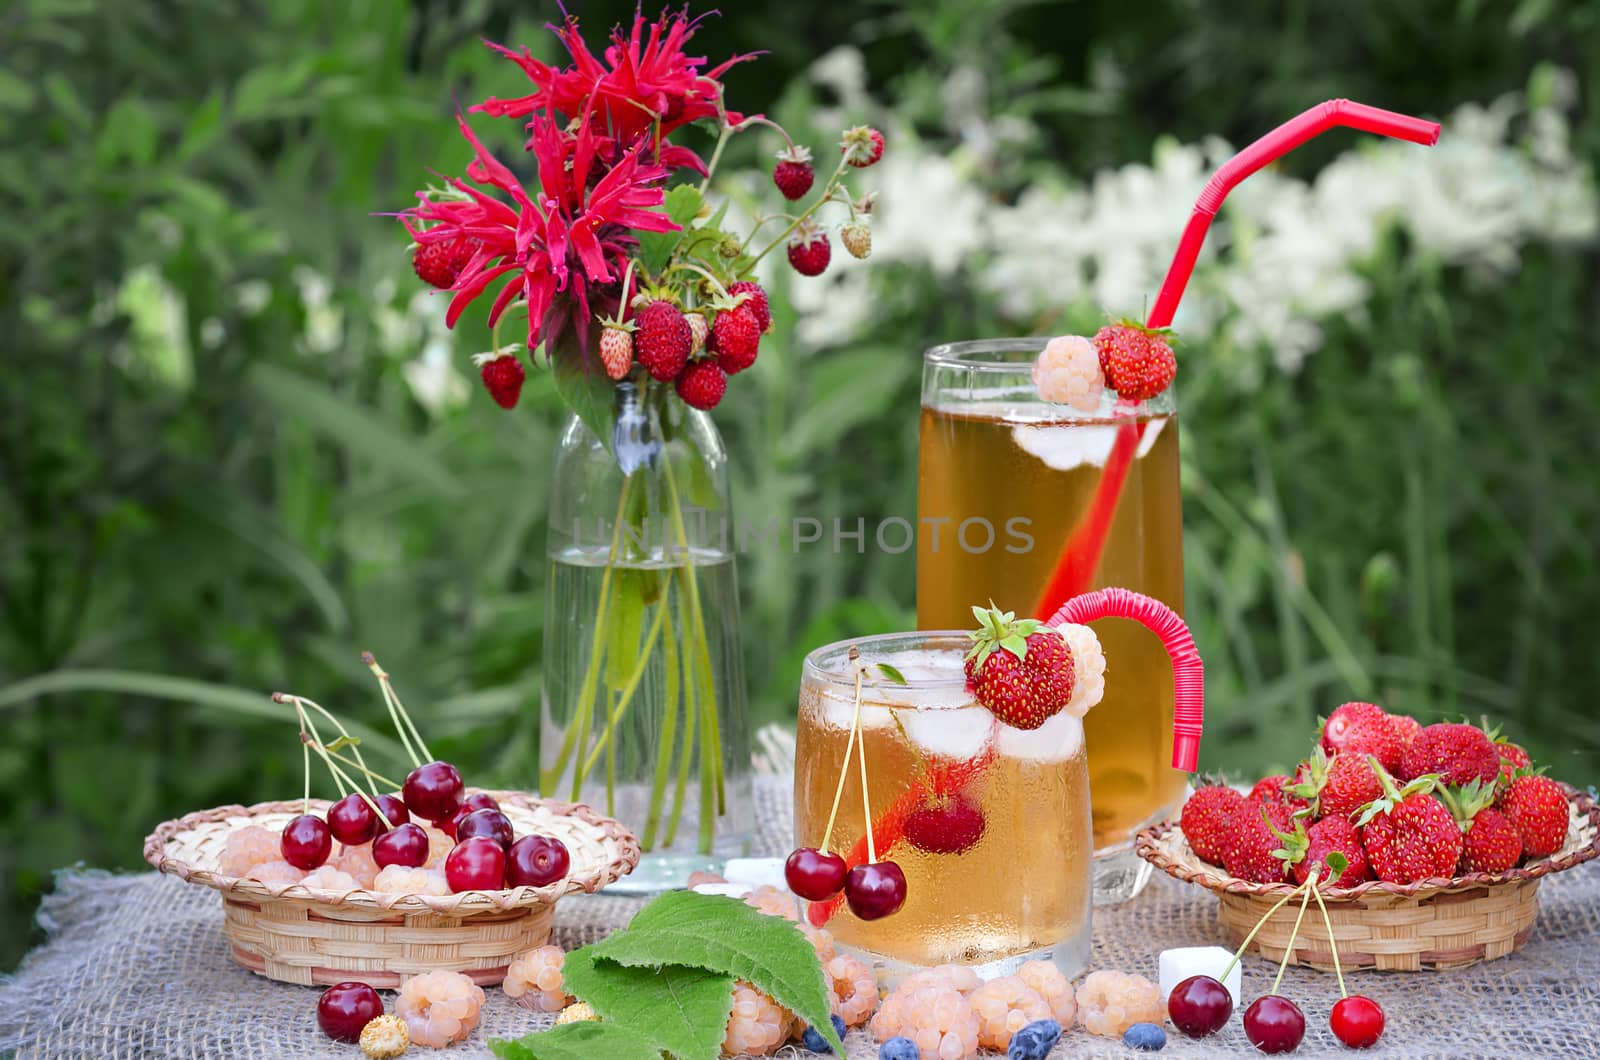 Cold tea with bergamot and berries by Gaina